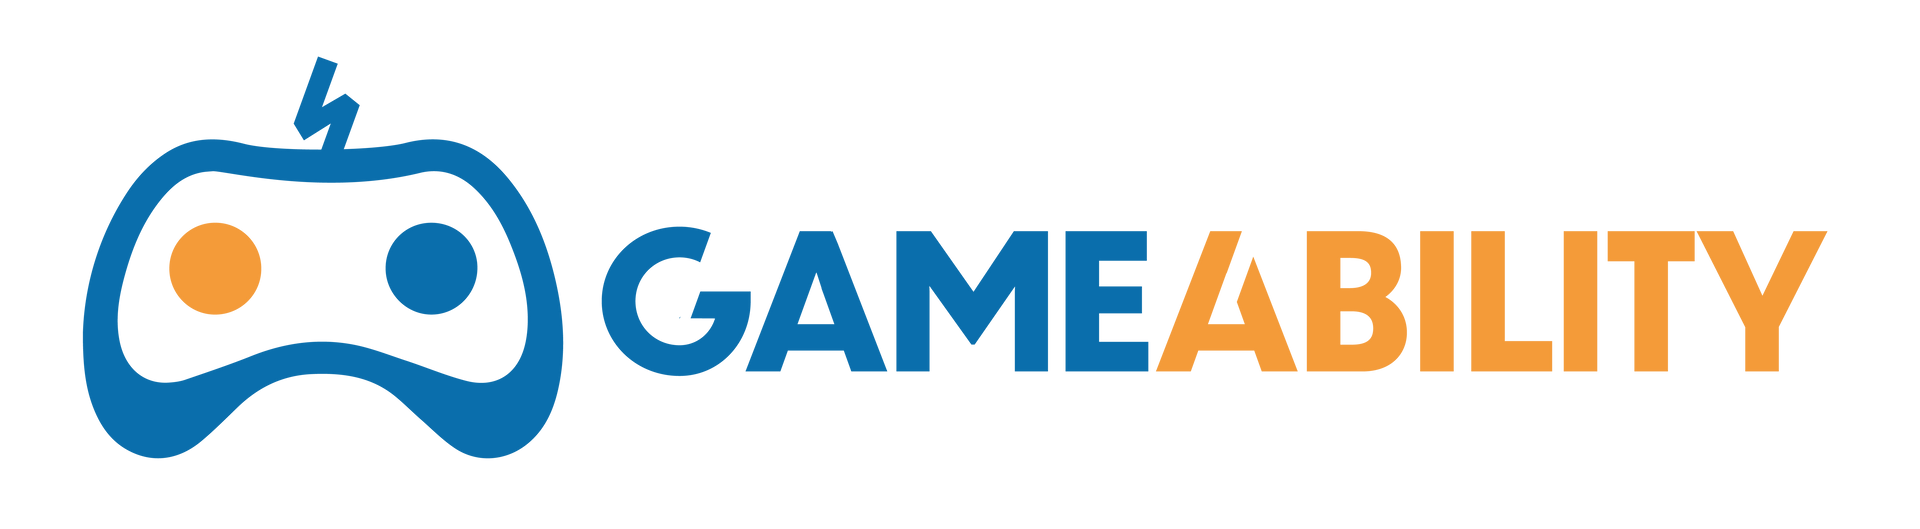 GameAbility event